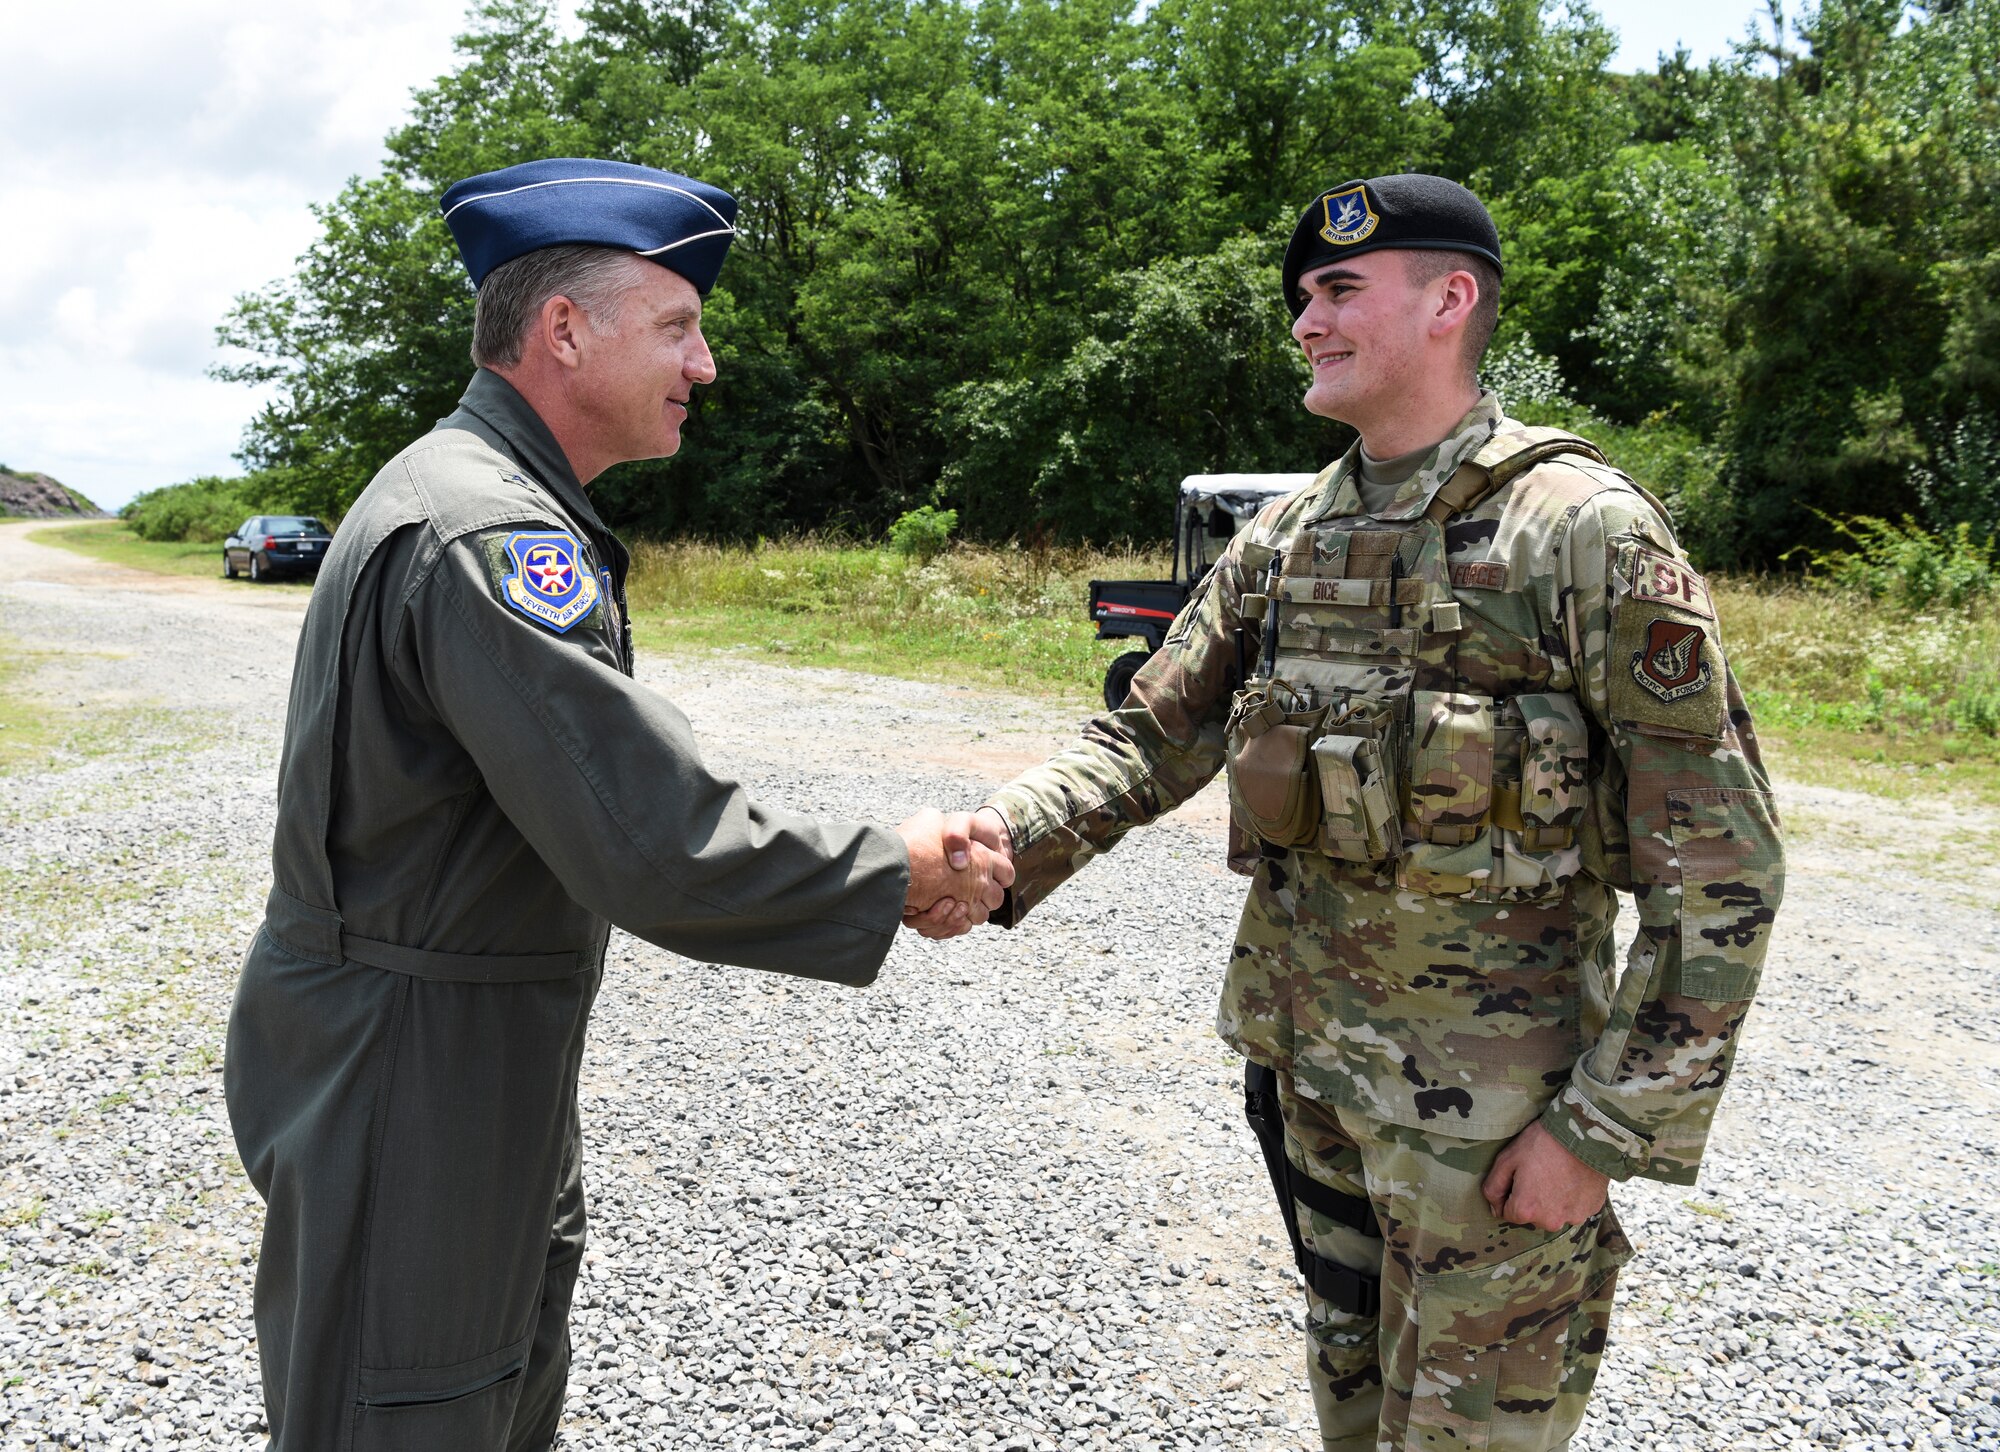 U.S. Air Force Brig. Gen. David Eaglin (left), 7th Air Force vice commander, shakes hands with Airman 1st Class Matthew Bice, 8th Security Forces Squadron member, during an immersion tour at Kunsan Air Base, Republic of Korea, July 12, 2019. Eaglin saw how the 8th SFS is ready to fulfill their critical role of defending the base. (U.S. Air Force photo by Staff Sgt. Joshua Edwards)